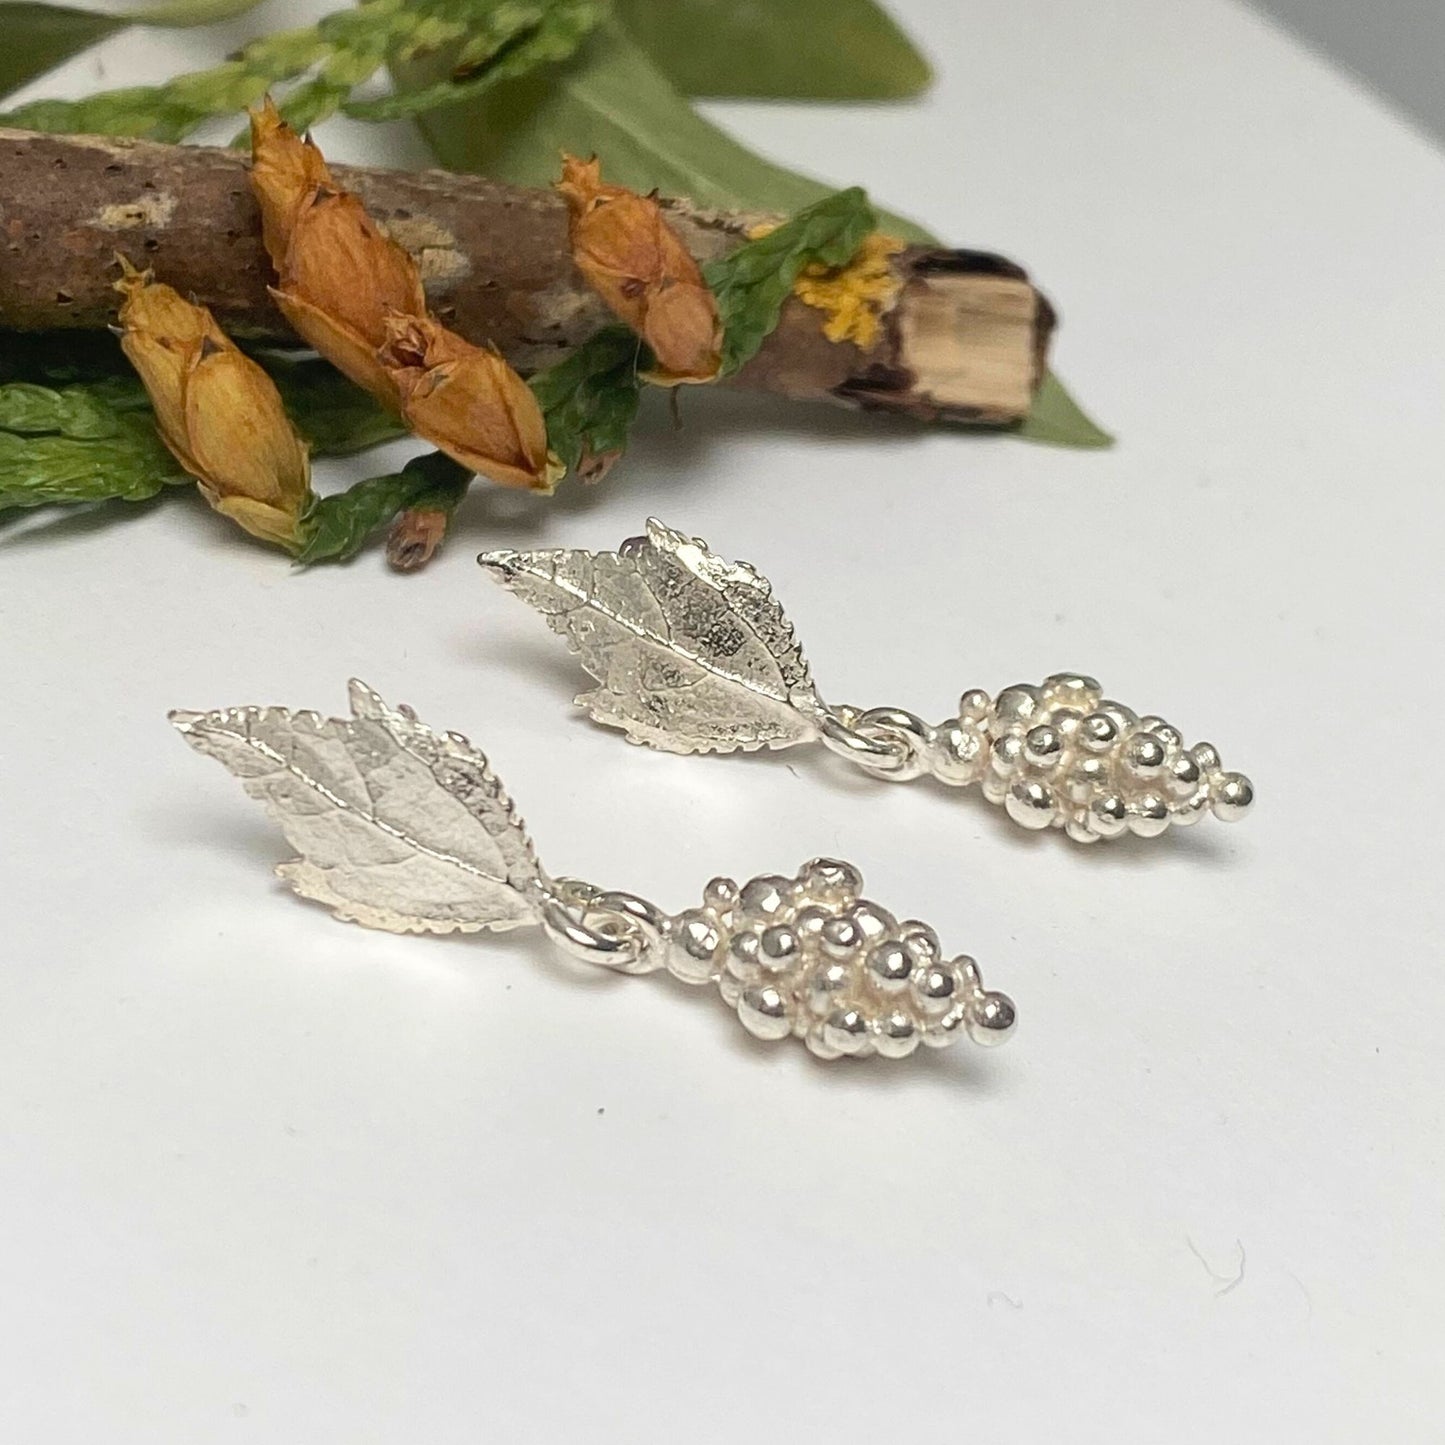 Woodland Elvish Silver Leaf and Berry Earrings